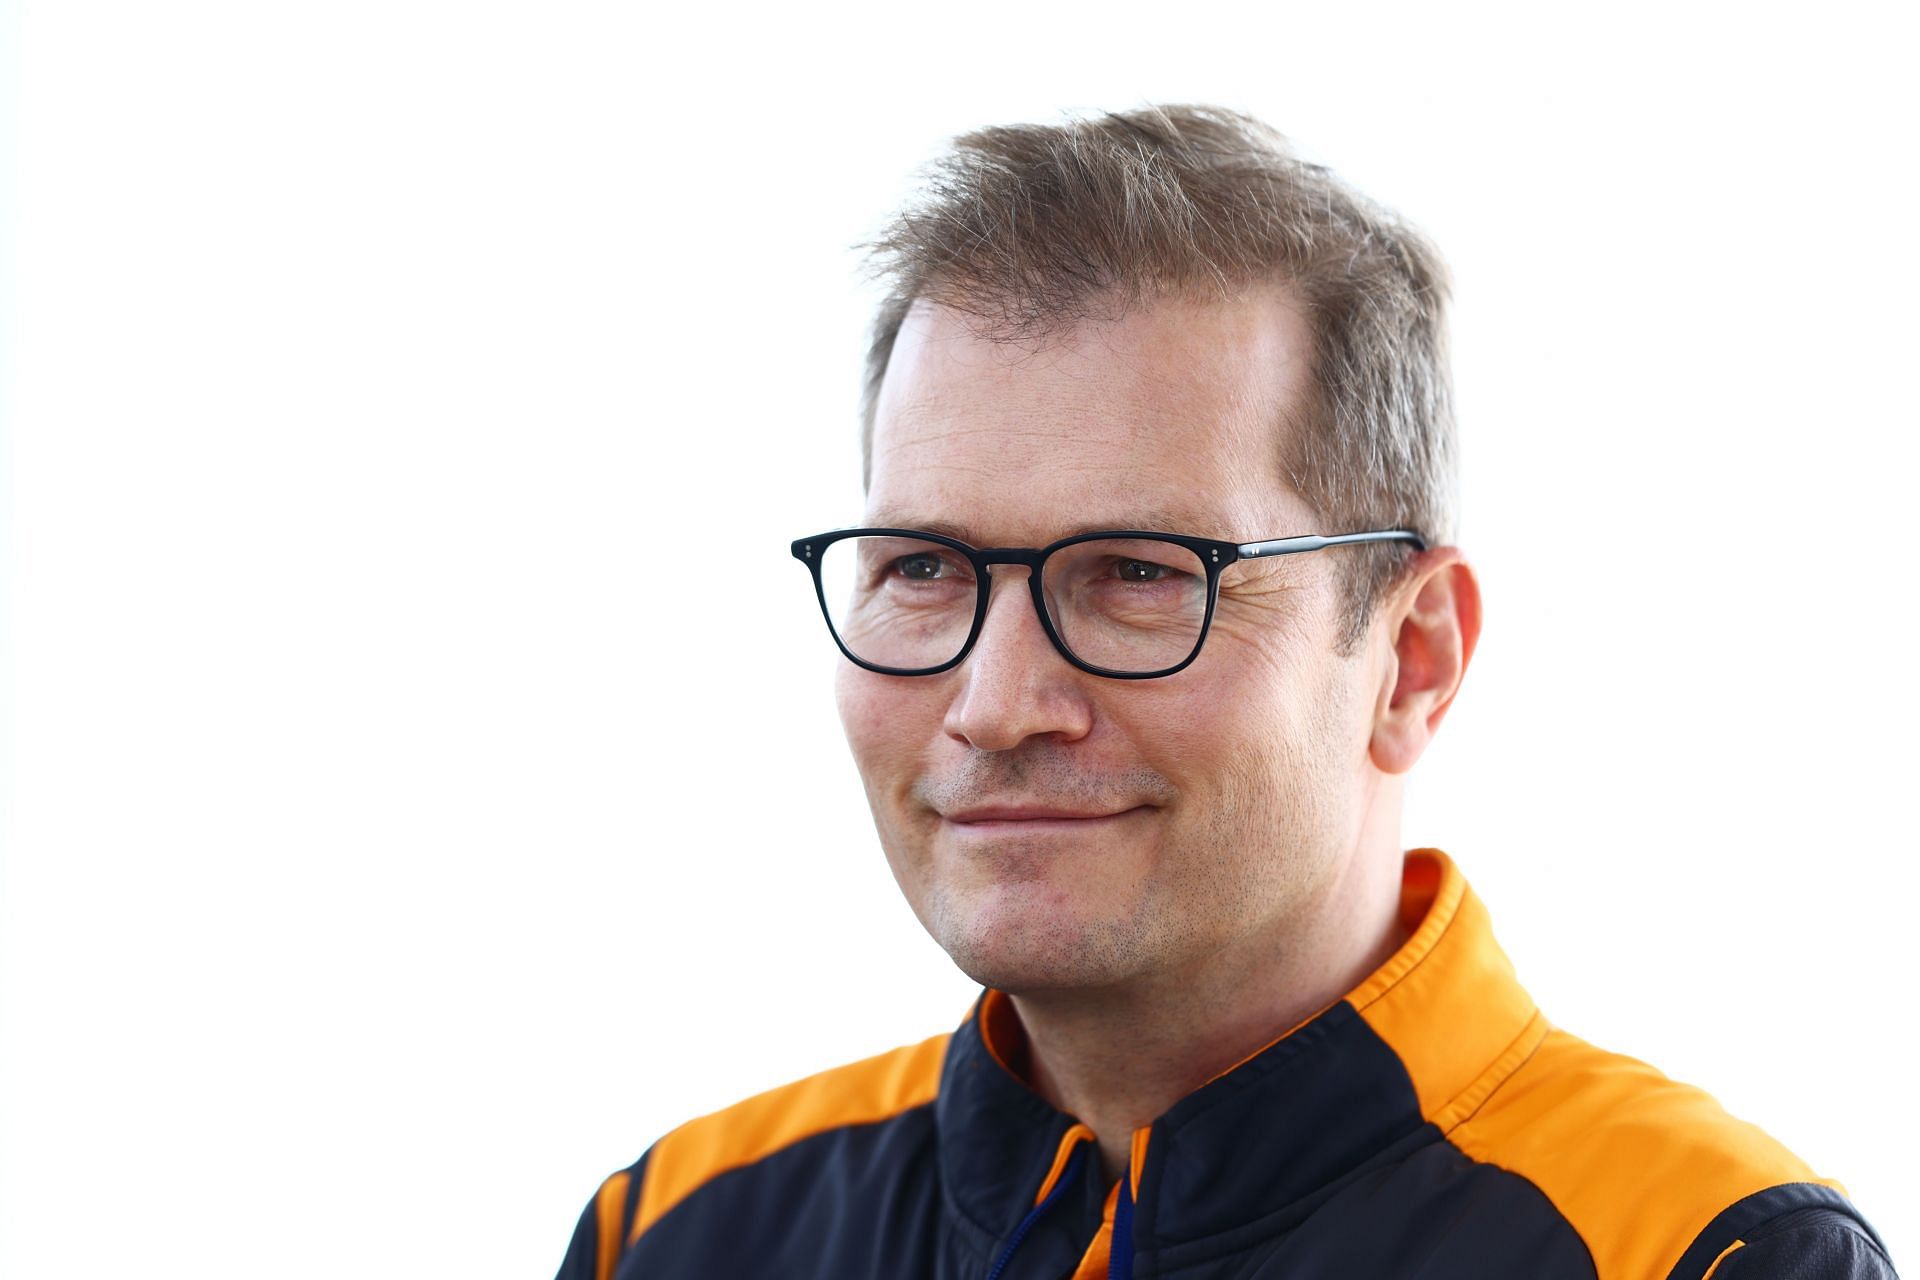 McLaren team principal Andreas Seidl has backed the new race directors and the way they have conducted themselves this season